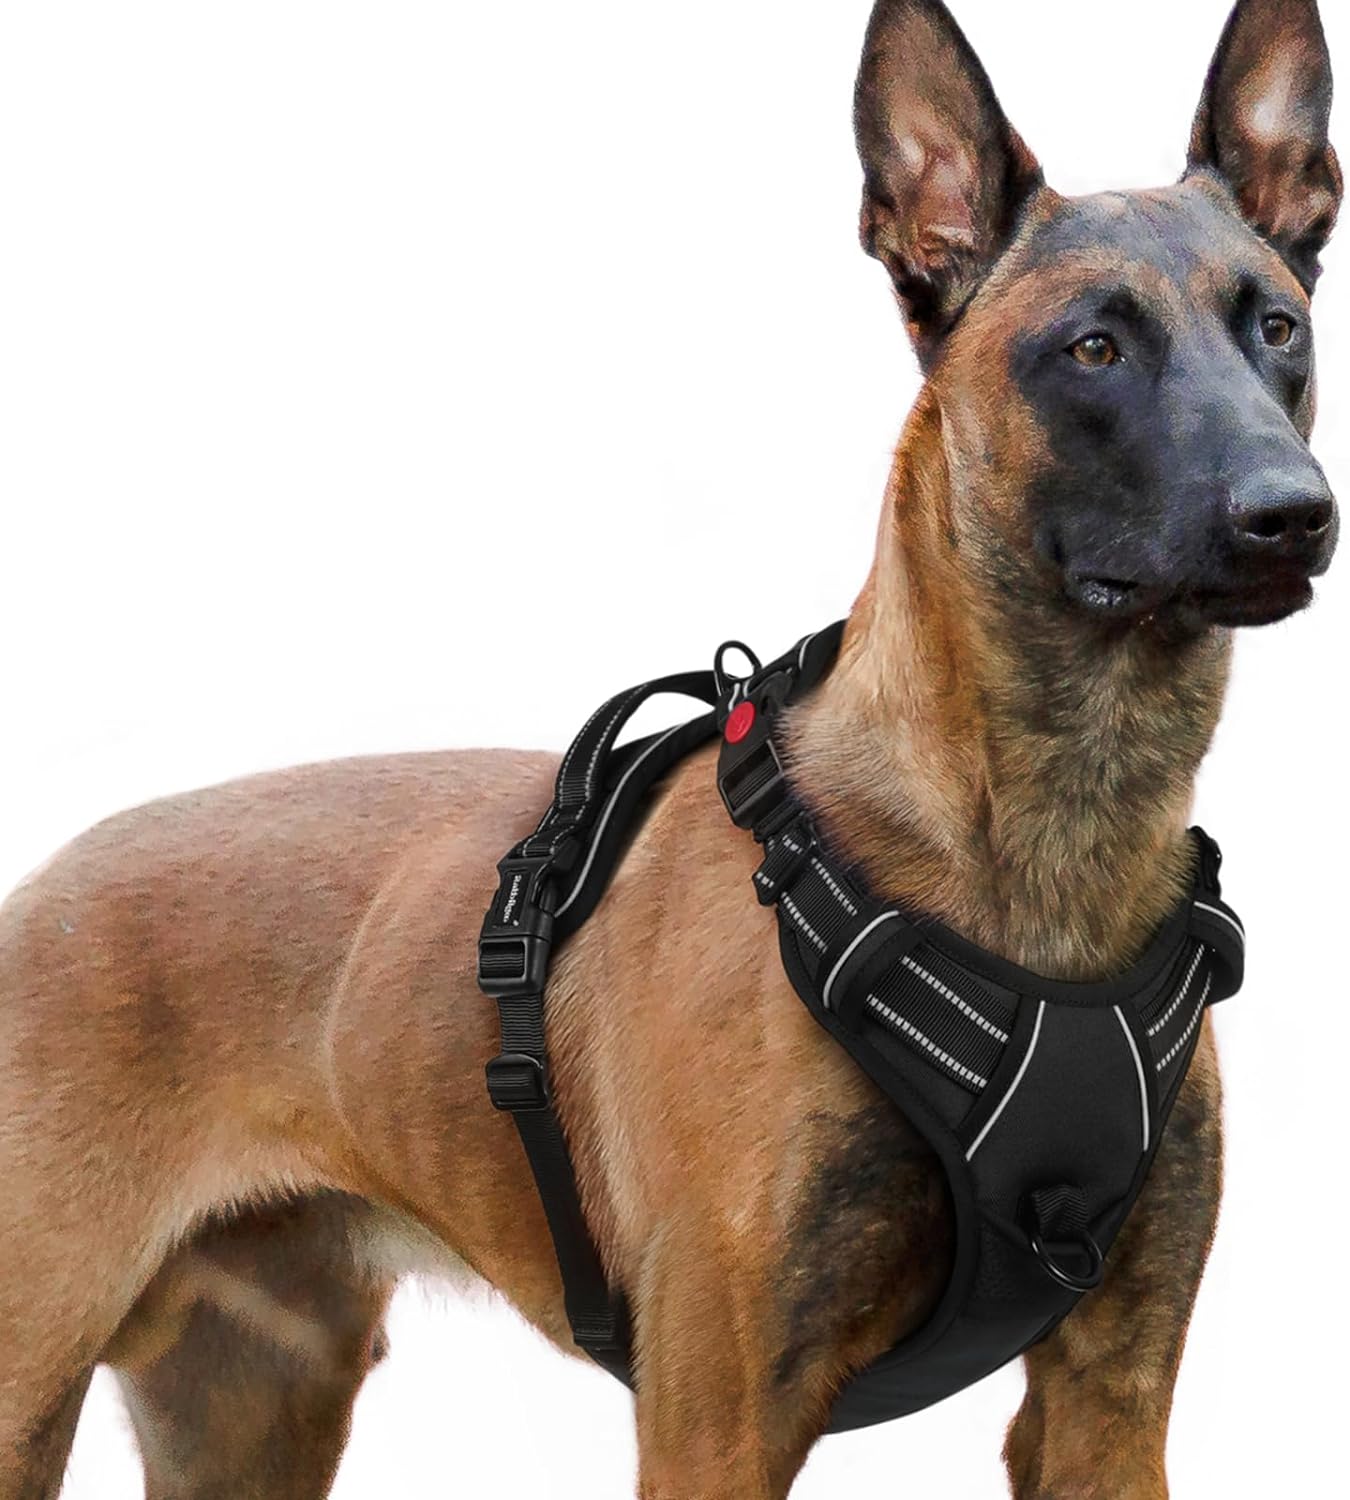 rabbitgoo Dog Harness Small Sized, No Pull Pet Harness with 3 Buckles, Adjustable Soft Padded Dog Vest with Instant Control Handle, Easy Walking Reflective Pet Vest for Small Dogs, Black, S